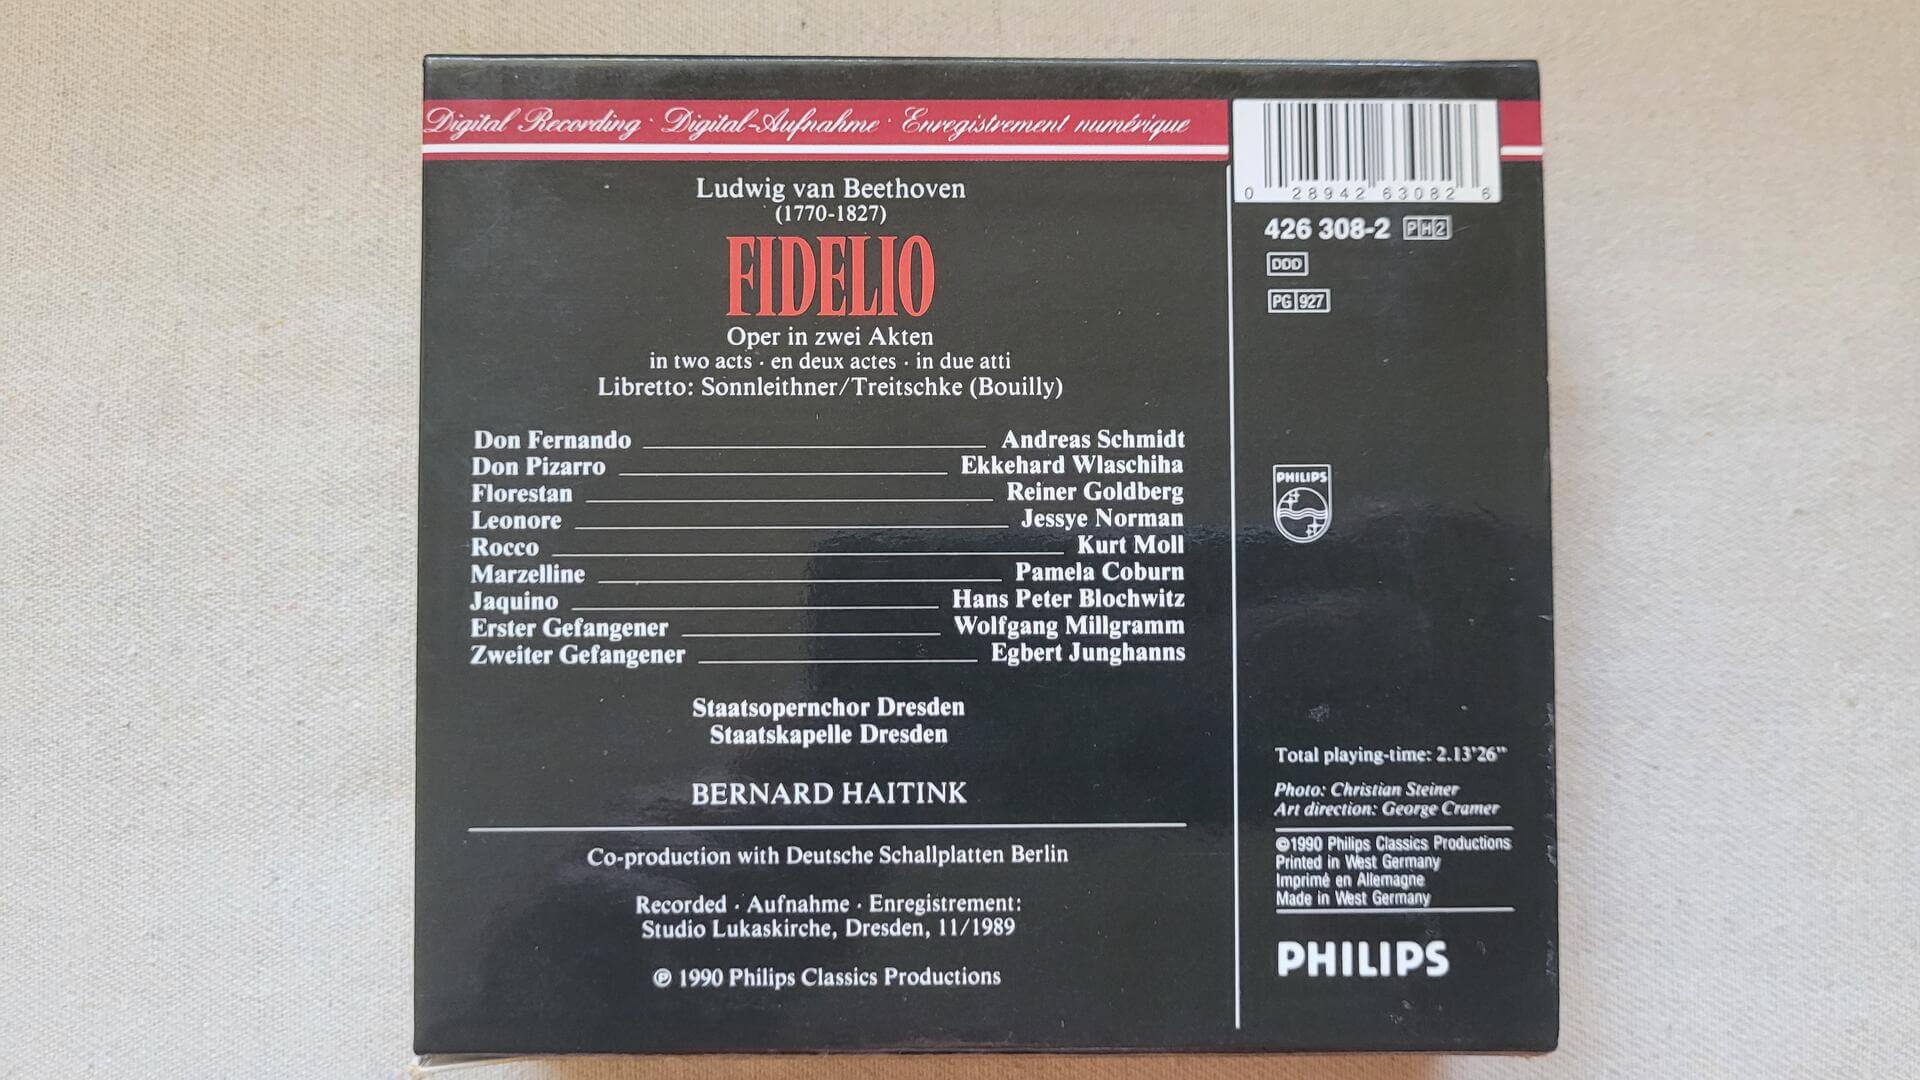 Beethoven's Fidelio by B. Haitink Philips Digital Classics 2-CD Box Set - Vintage made in Germany collectible music digital compact disc opera recording